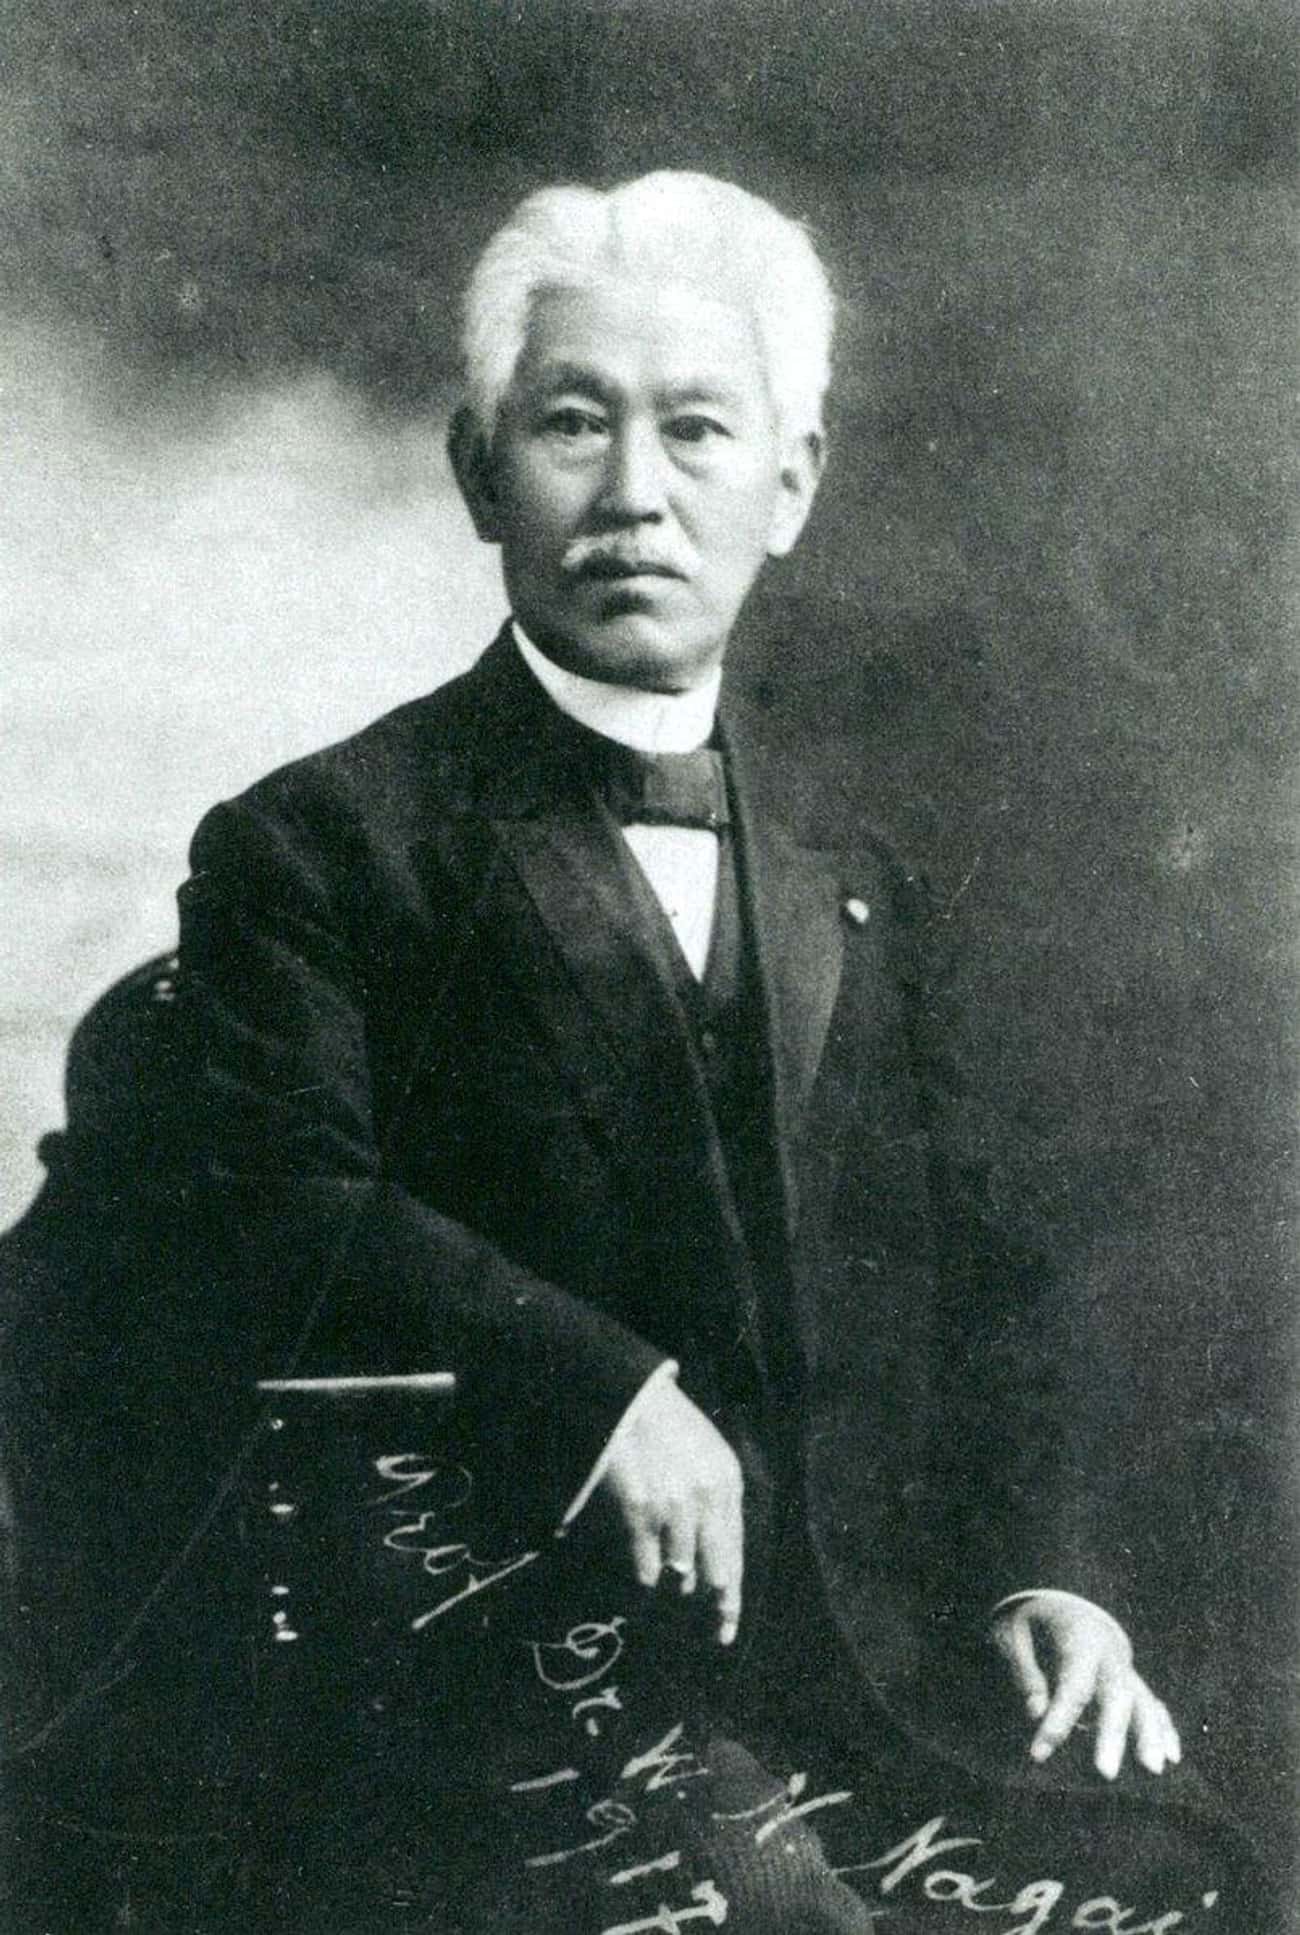 A Japanese Scientist Invented The Drug In Germany In 1893